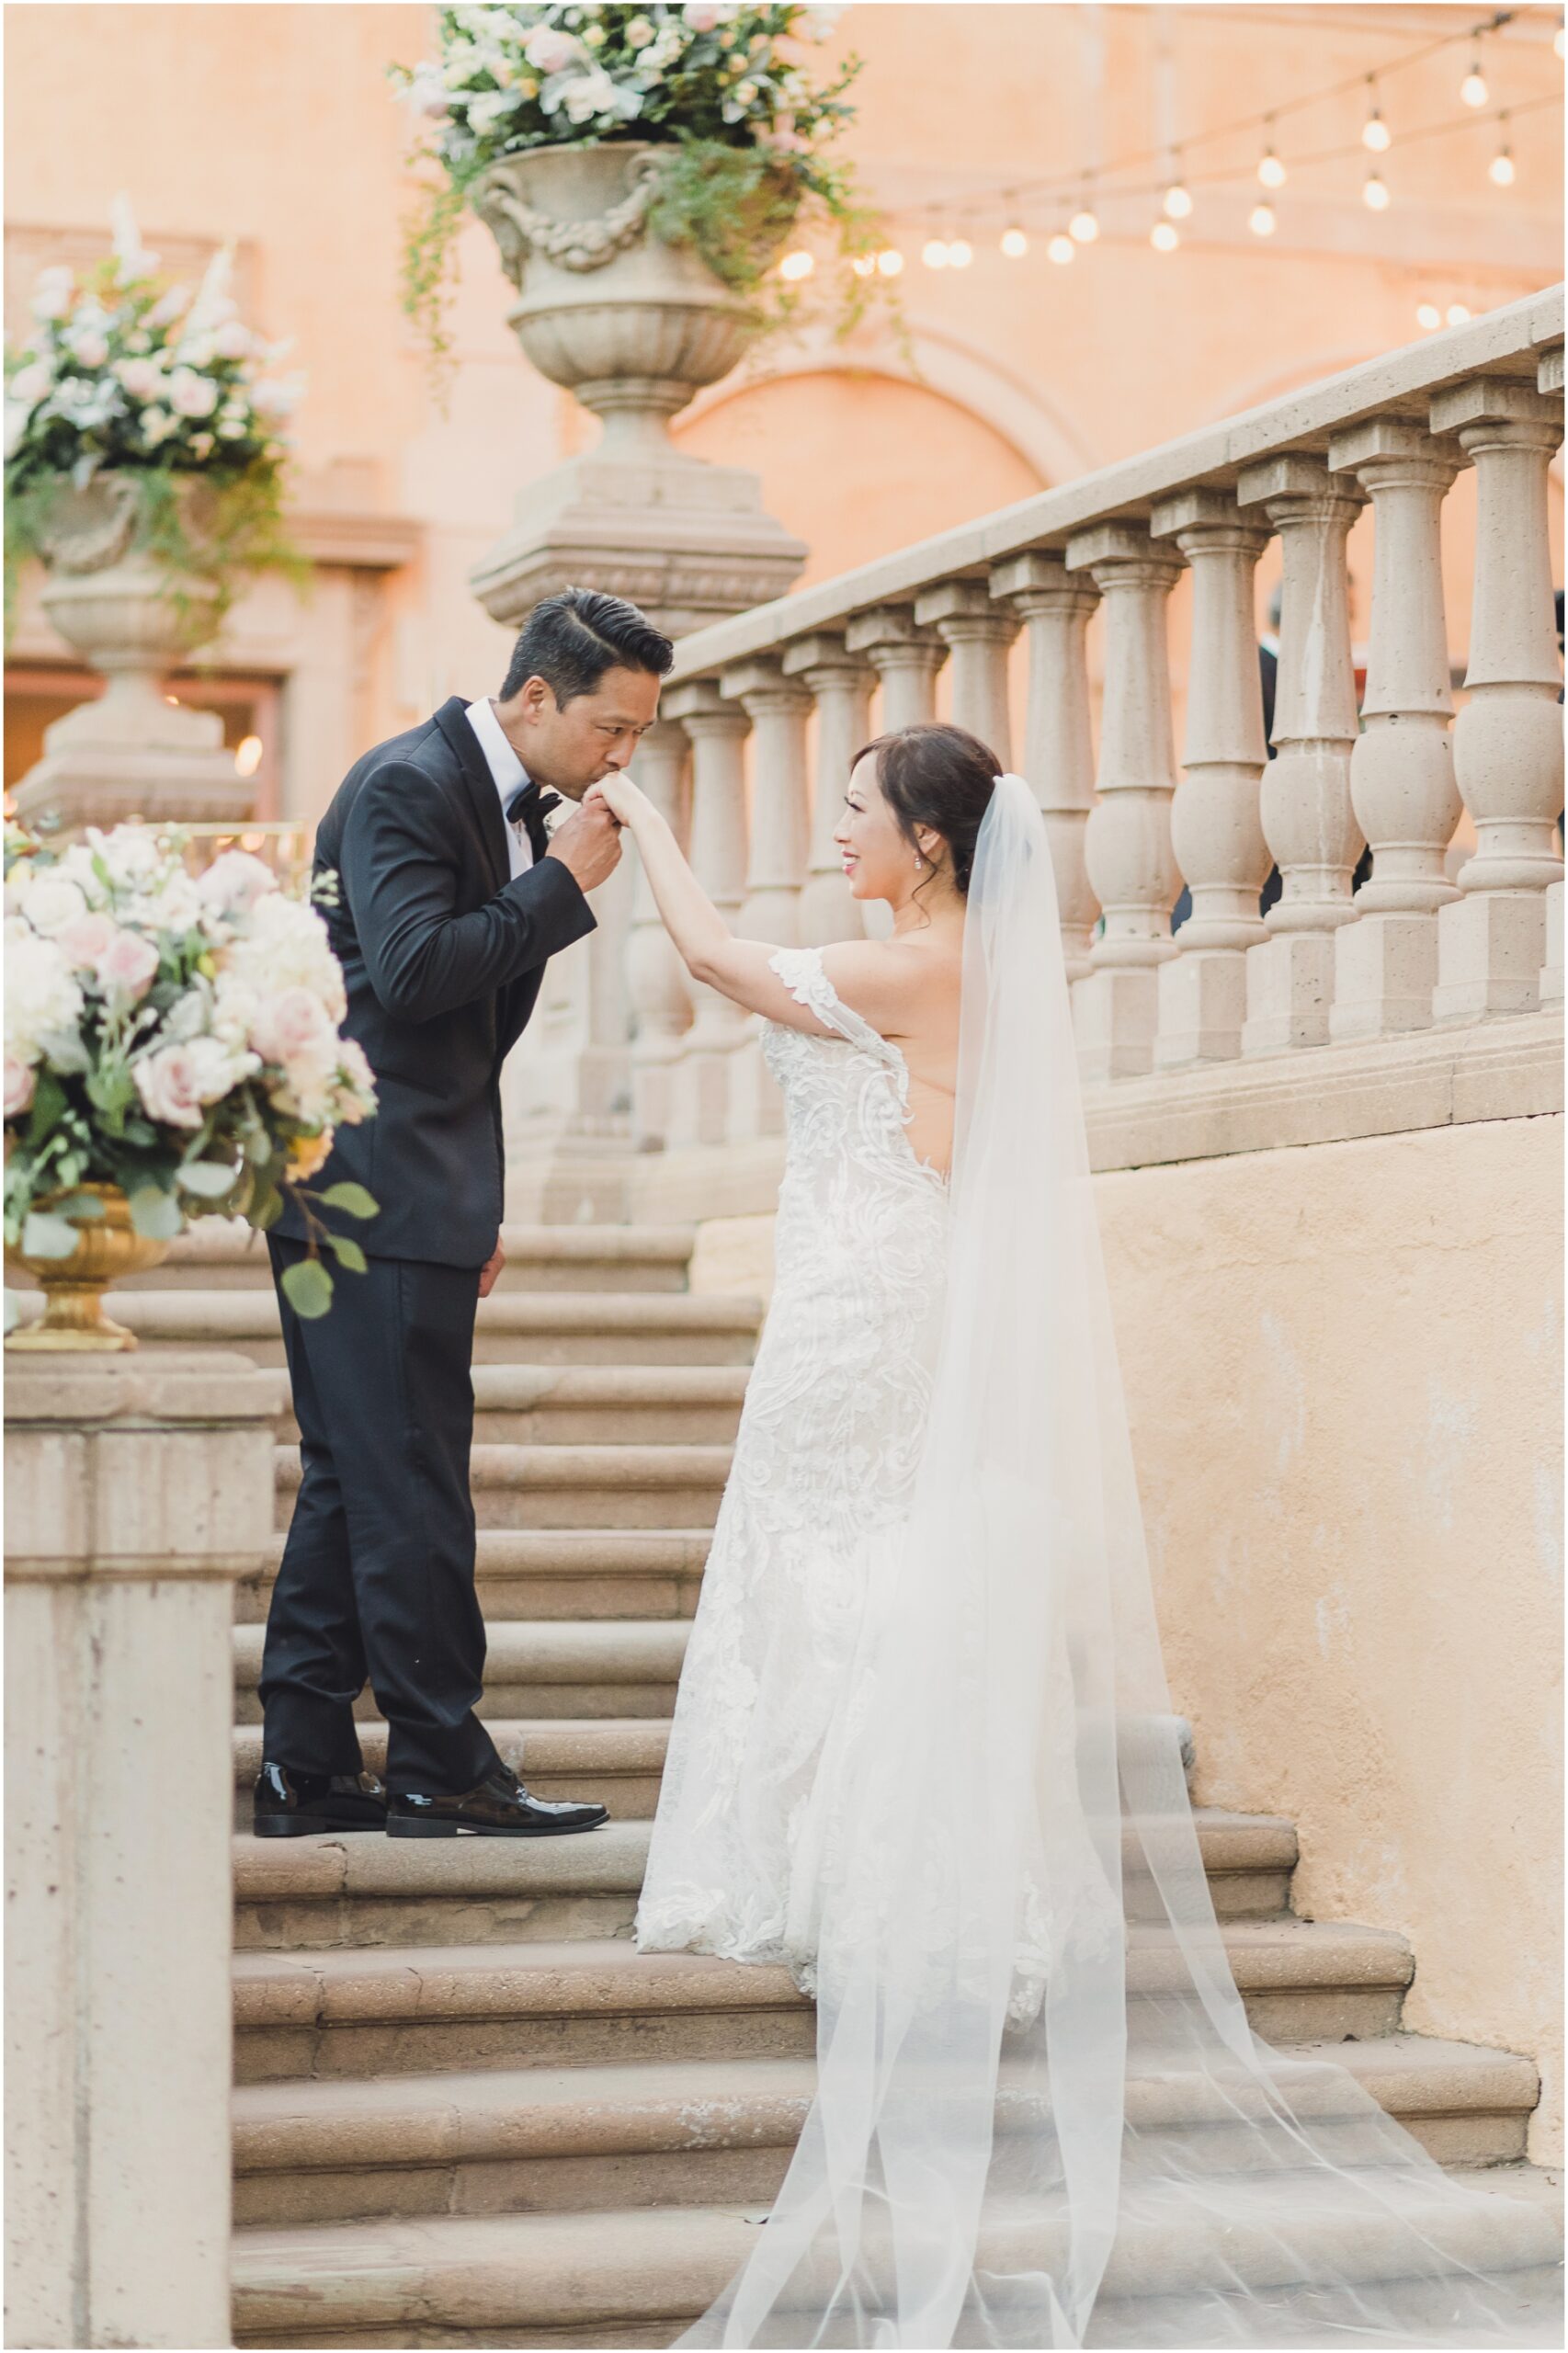 A groom kisses the hand of his bride on the steps below their wedding reception at Villa del sol d'Oro. The bride has a gorgeous veil that trails all the way down the stairs. photo taken by sun and sparrow photography